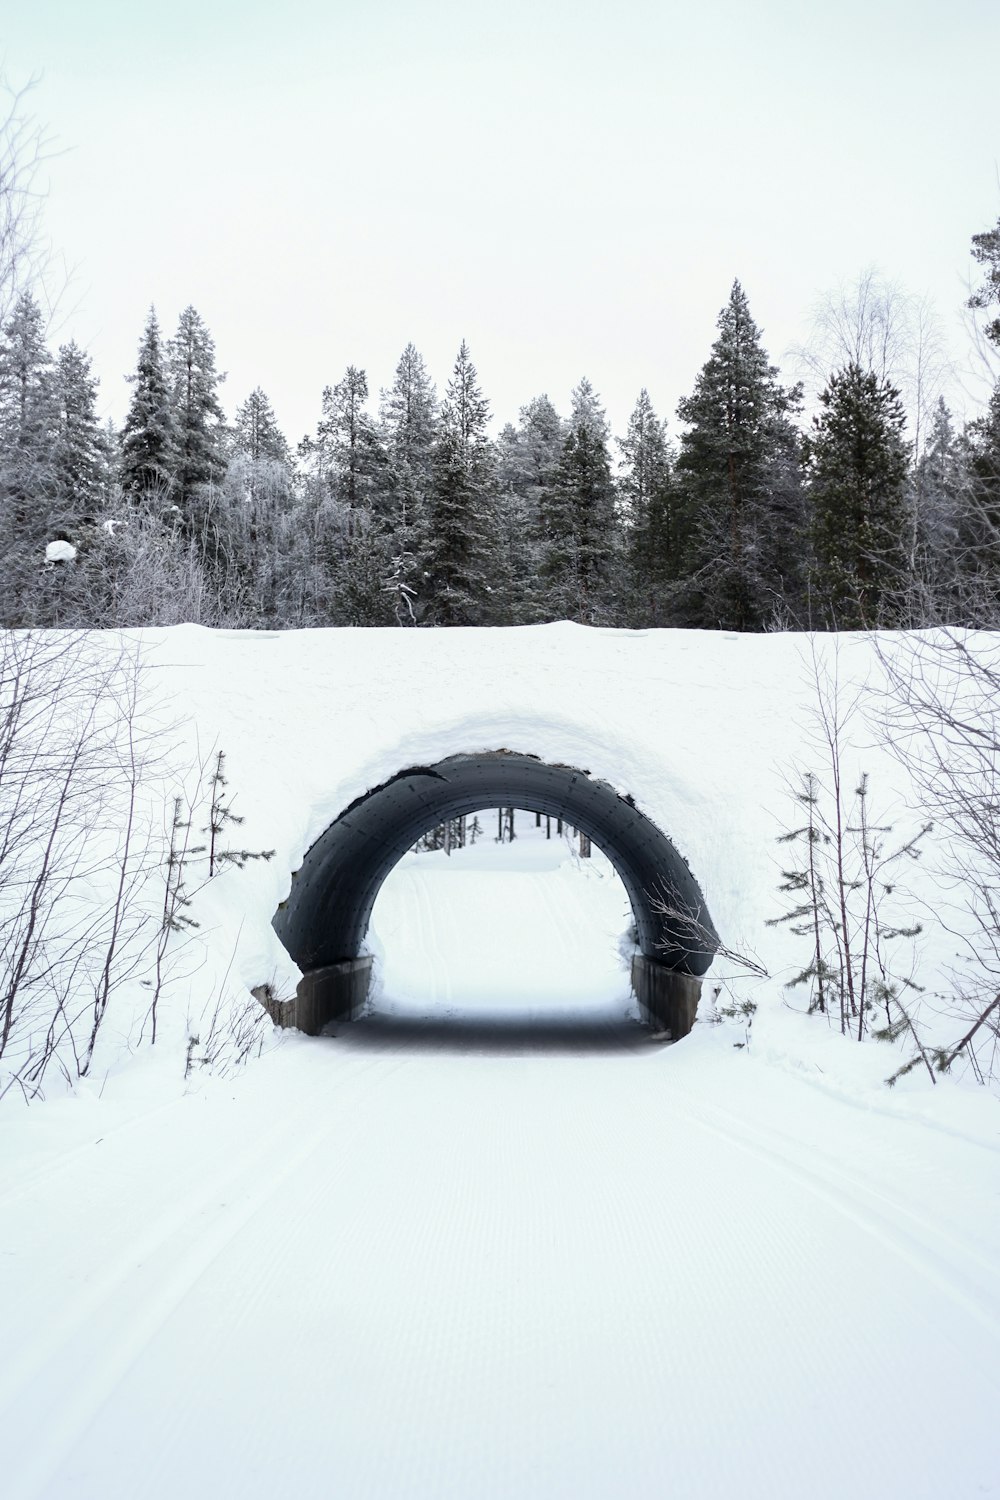 a tunnel in the snow with trees in the background